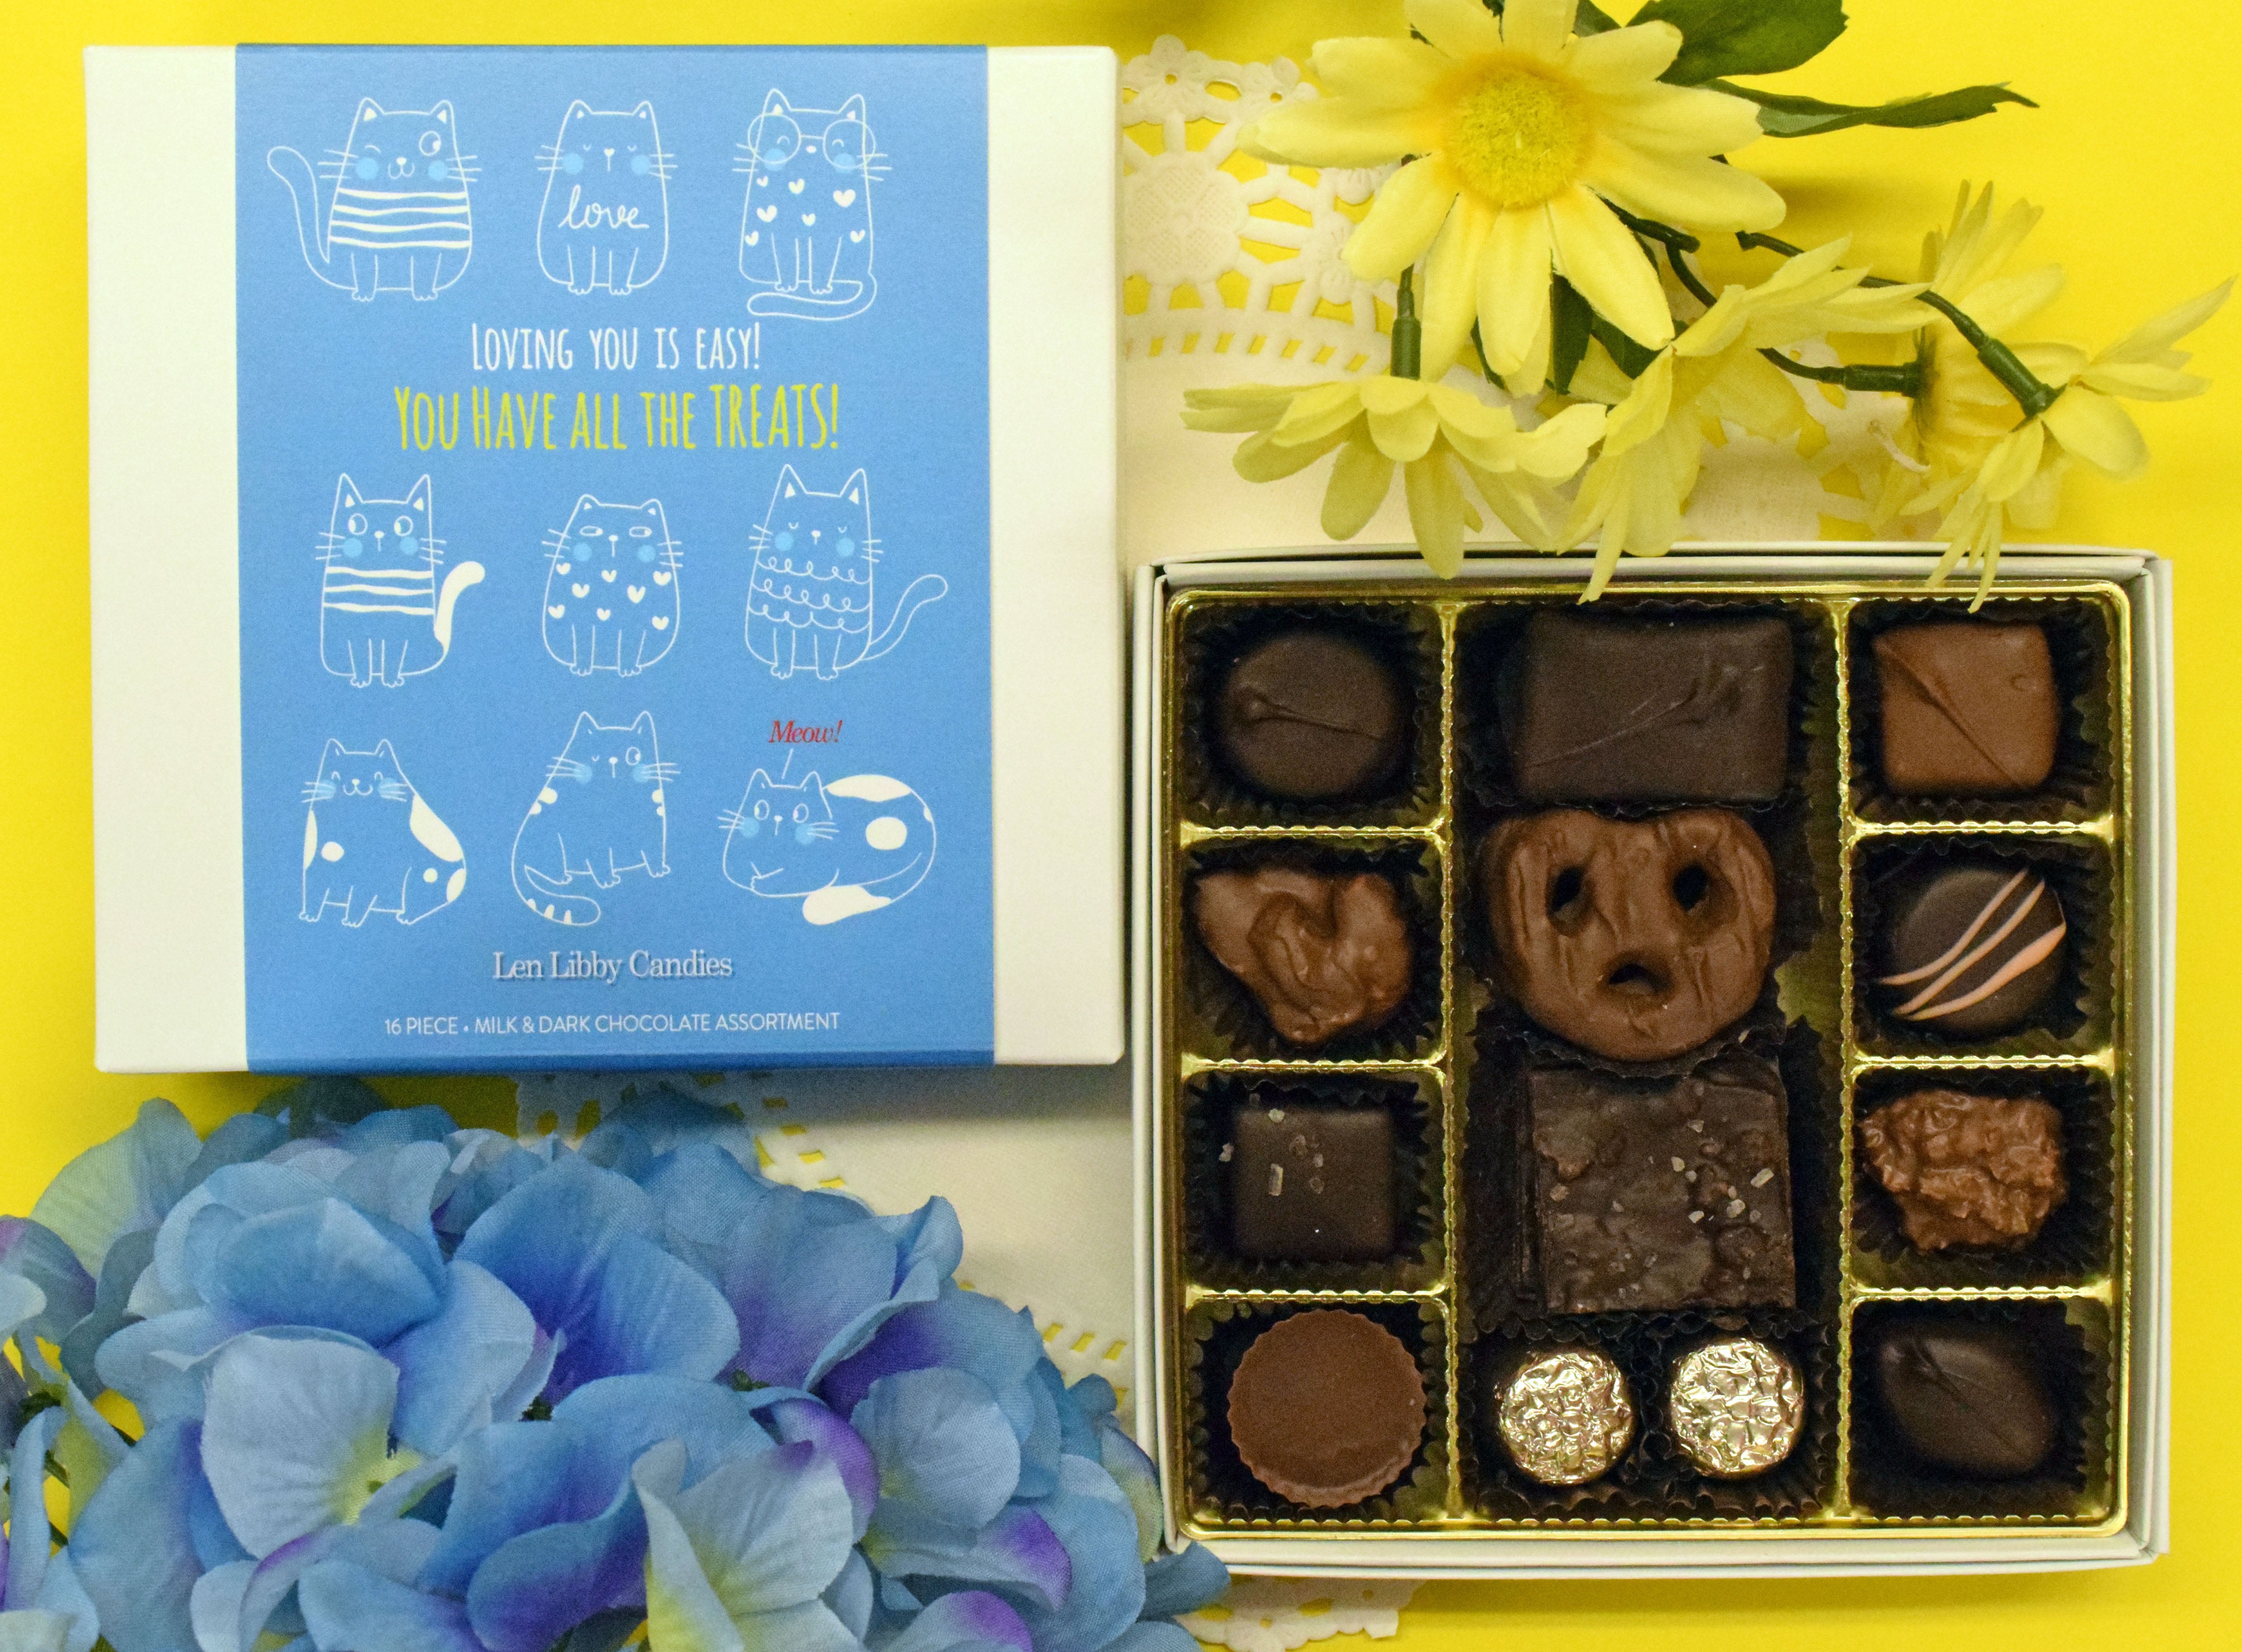 I LOVE YOU BOX - Flowers and chocolate (SOLD OUT)